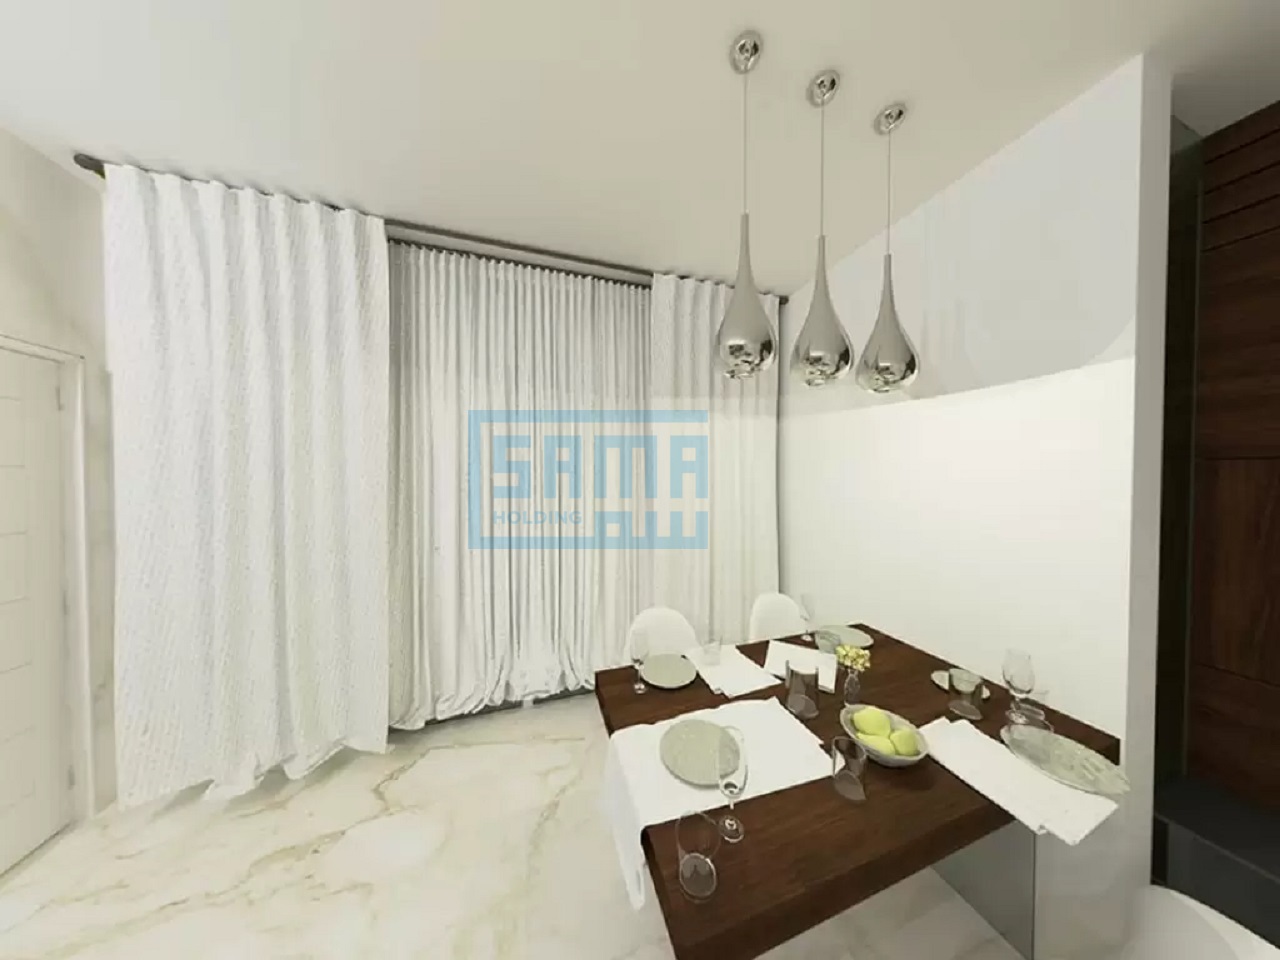 Luxurious 3 BEDROOMS + ROOF Residential Unit for Sale in Al Raha Beach under Al Raha Lofts 2 Project, Abu Dhabi